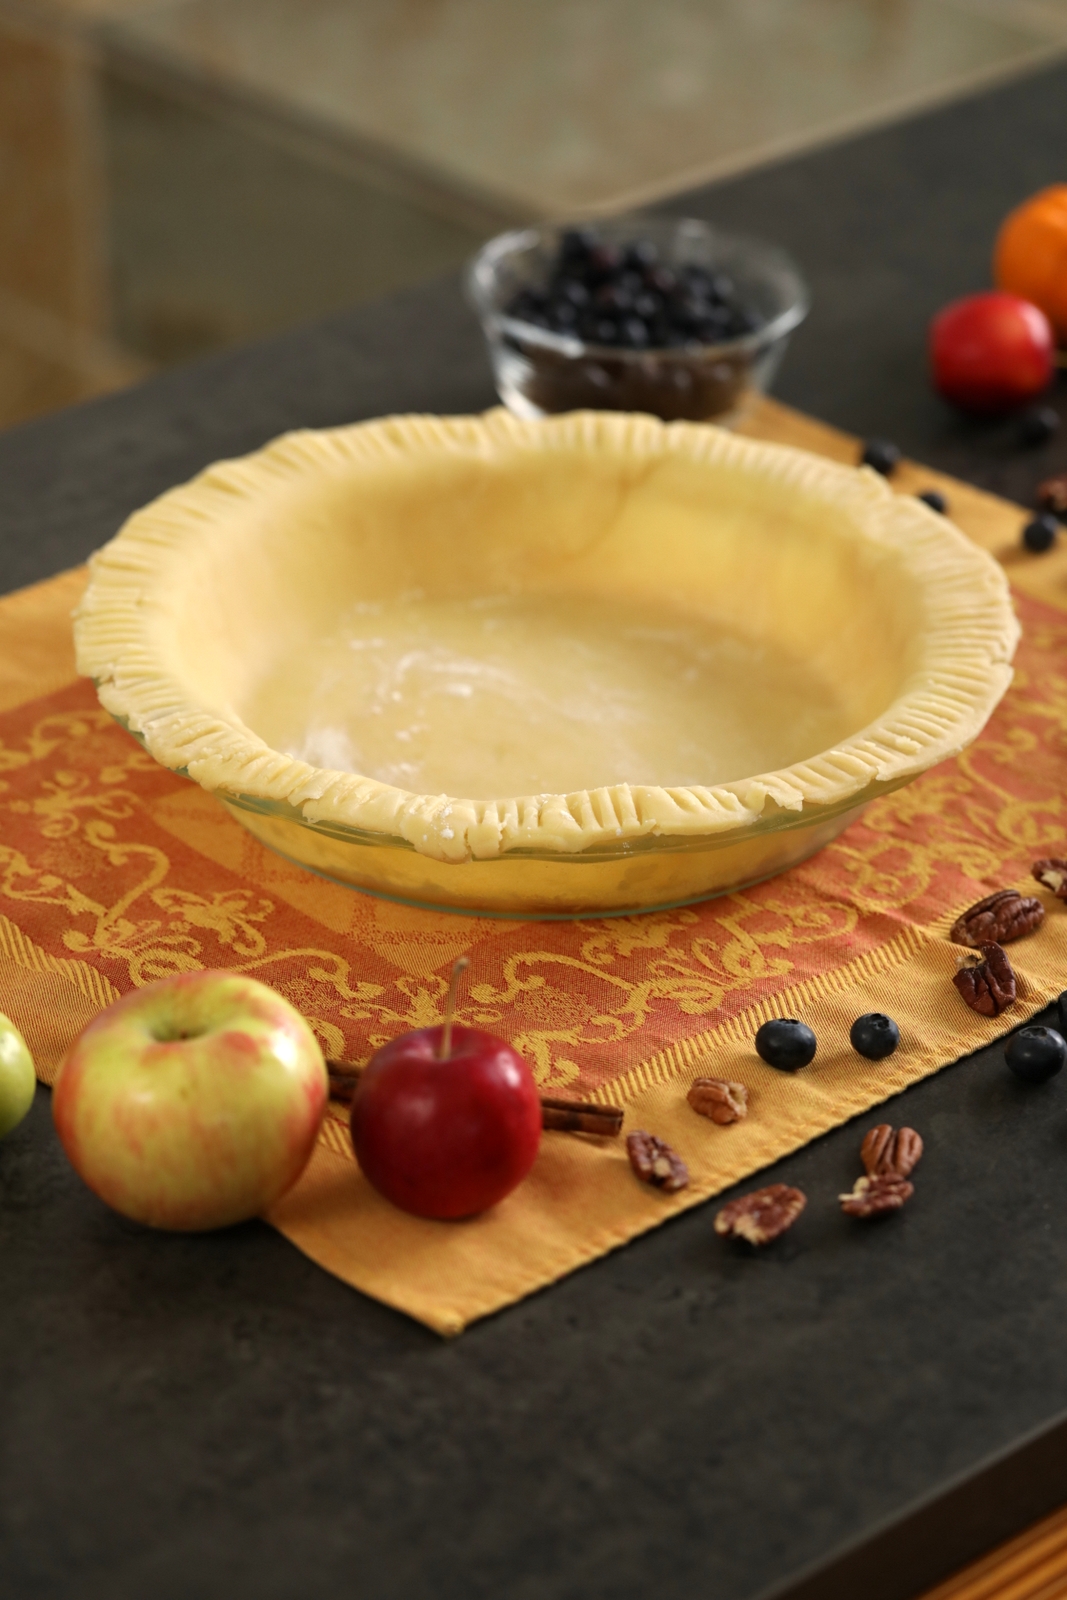 You can make a delicious pie crust - here's how